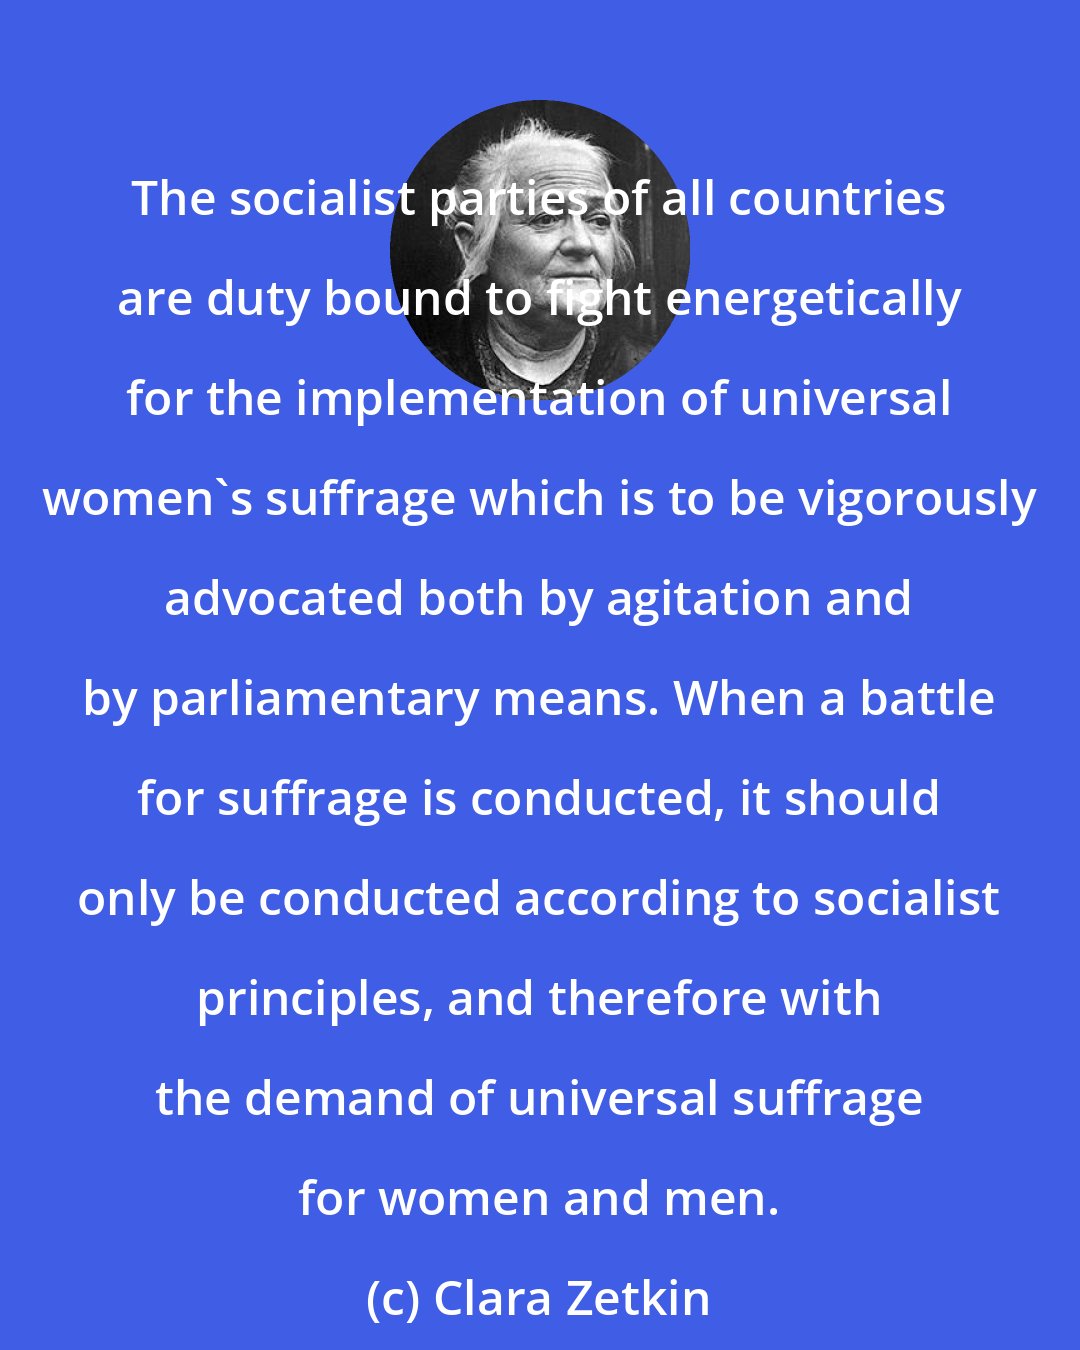 Clara Zetkin: The socialist parties of all countries are duty bound to fight energetically for the implementation of universal women's suffrage which is to be vigorously advocated both by agitation and by parliamentary means. When a battle for suffrage is conducted, it should only be conducted according to socialist principles, and therefore with the demand of universal suffrage for women and men.